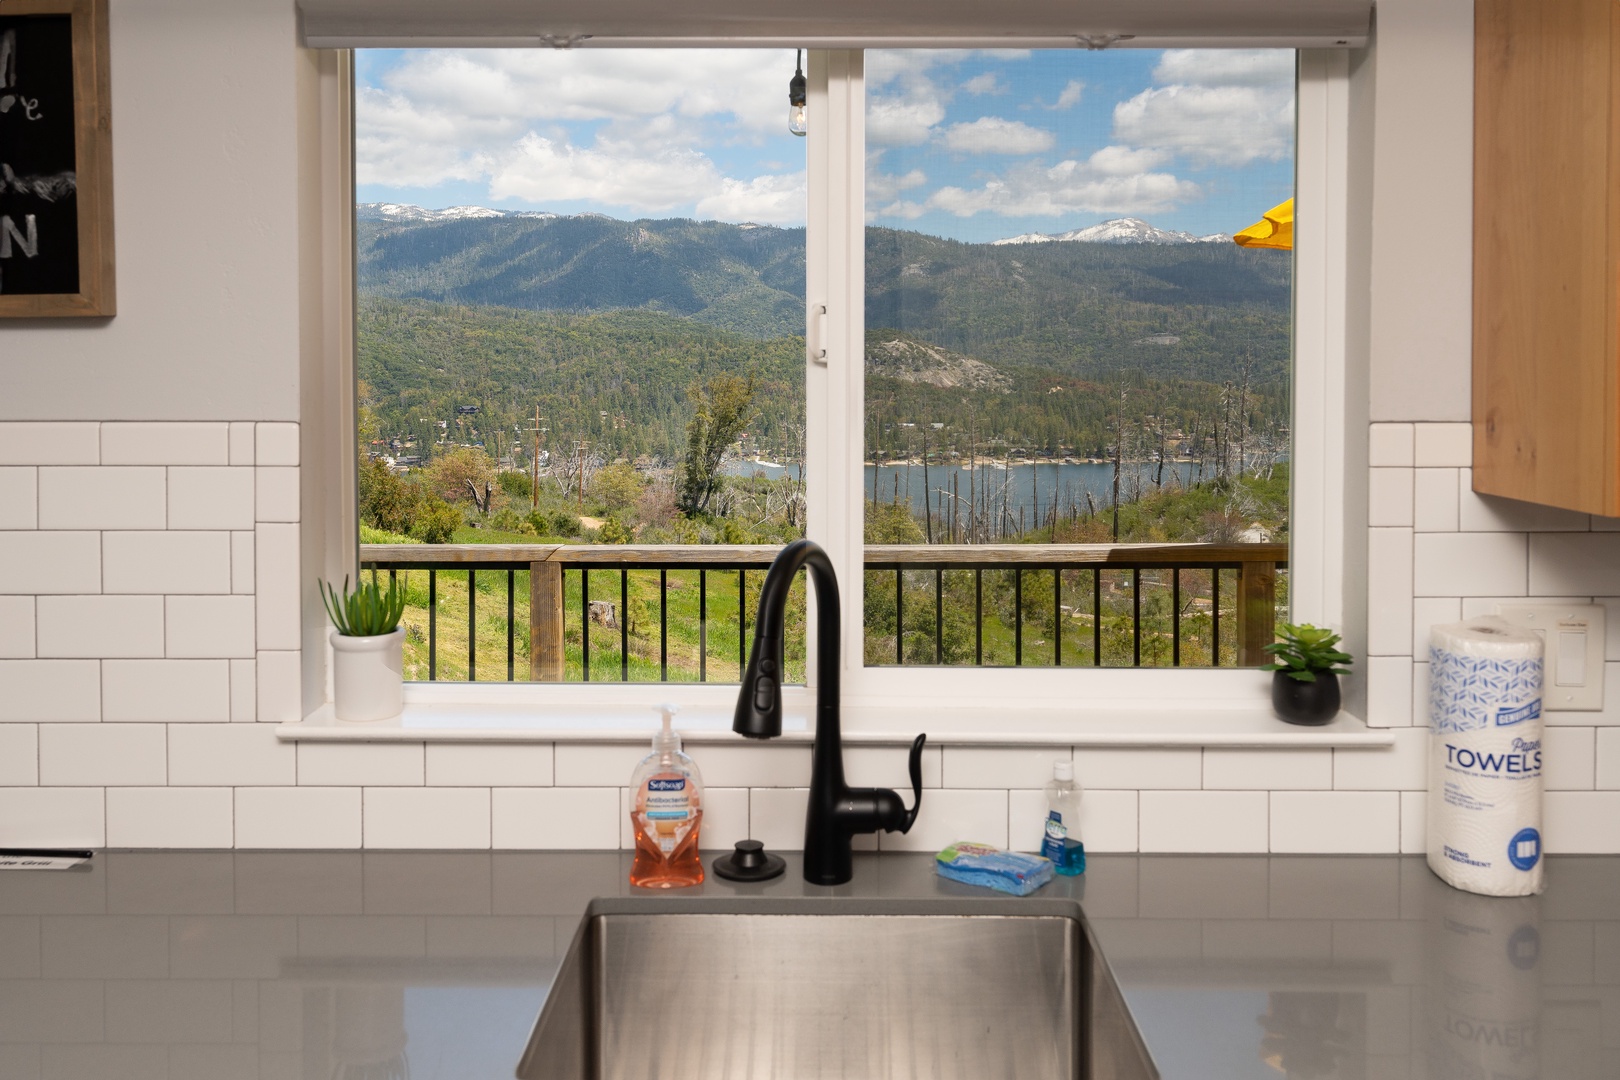 Sink with a view!